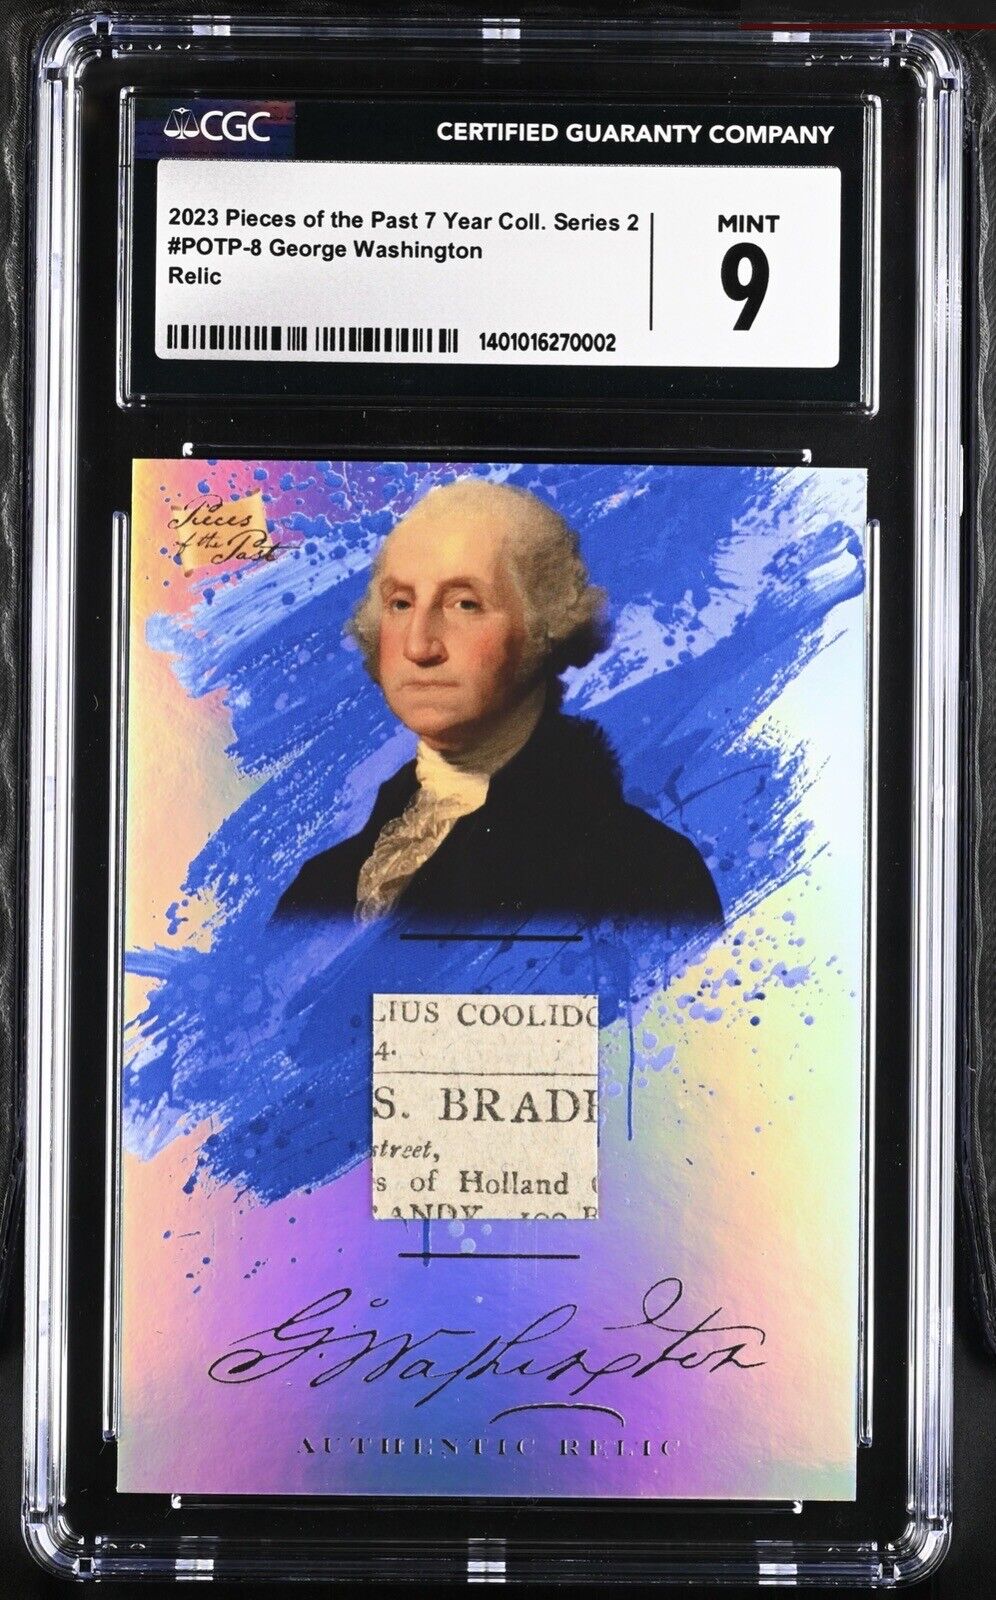 *CGC 9 Mint* 2023 PIECES OF THE PAST GEORGE WASHINGTON RELIC POTP-8 7-Year Coll